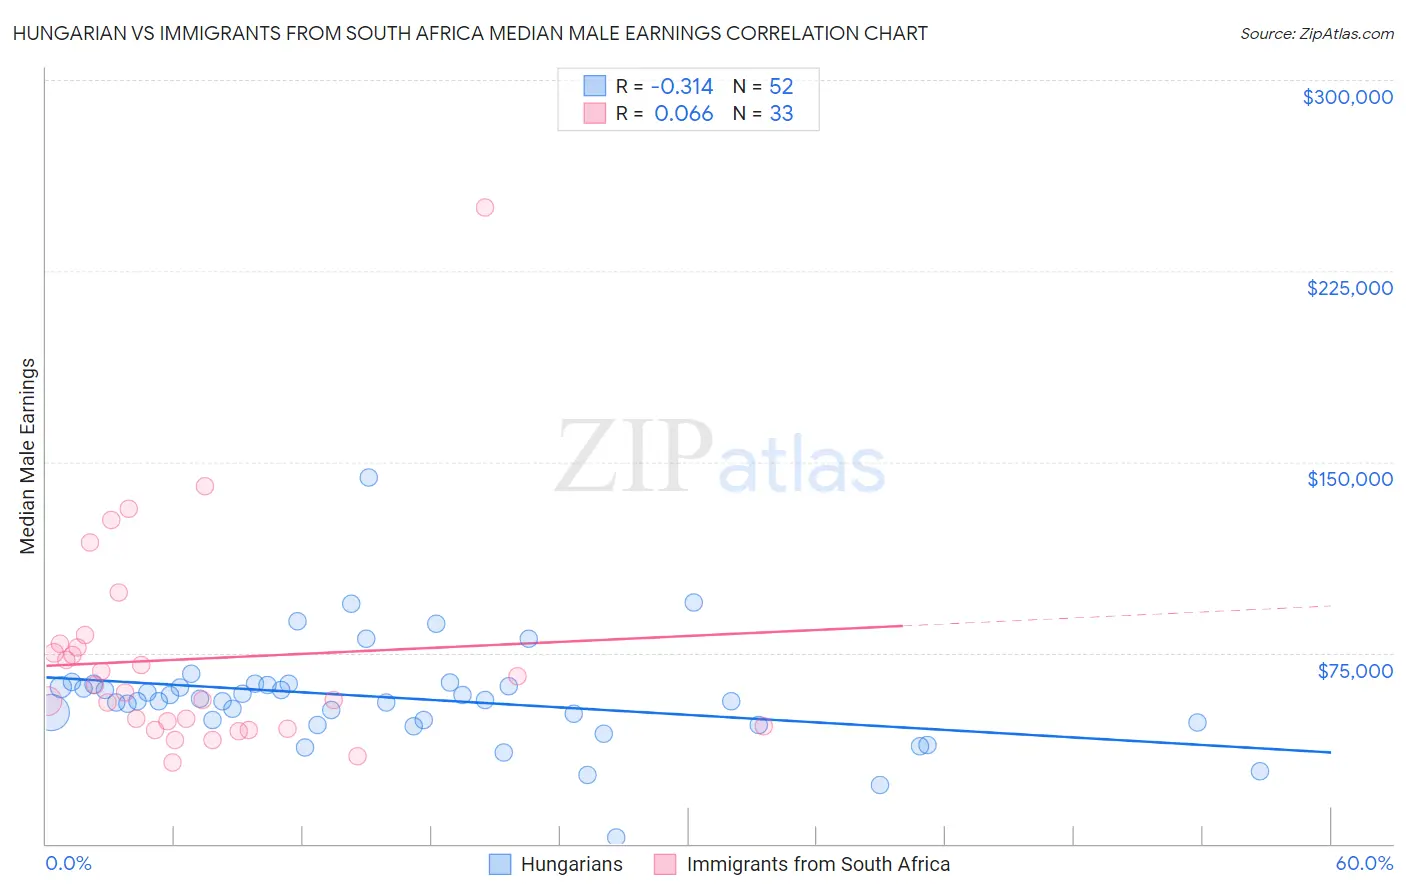 Hungarian vs Immigrants from South Africa Median Male Earnings